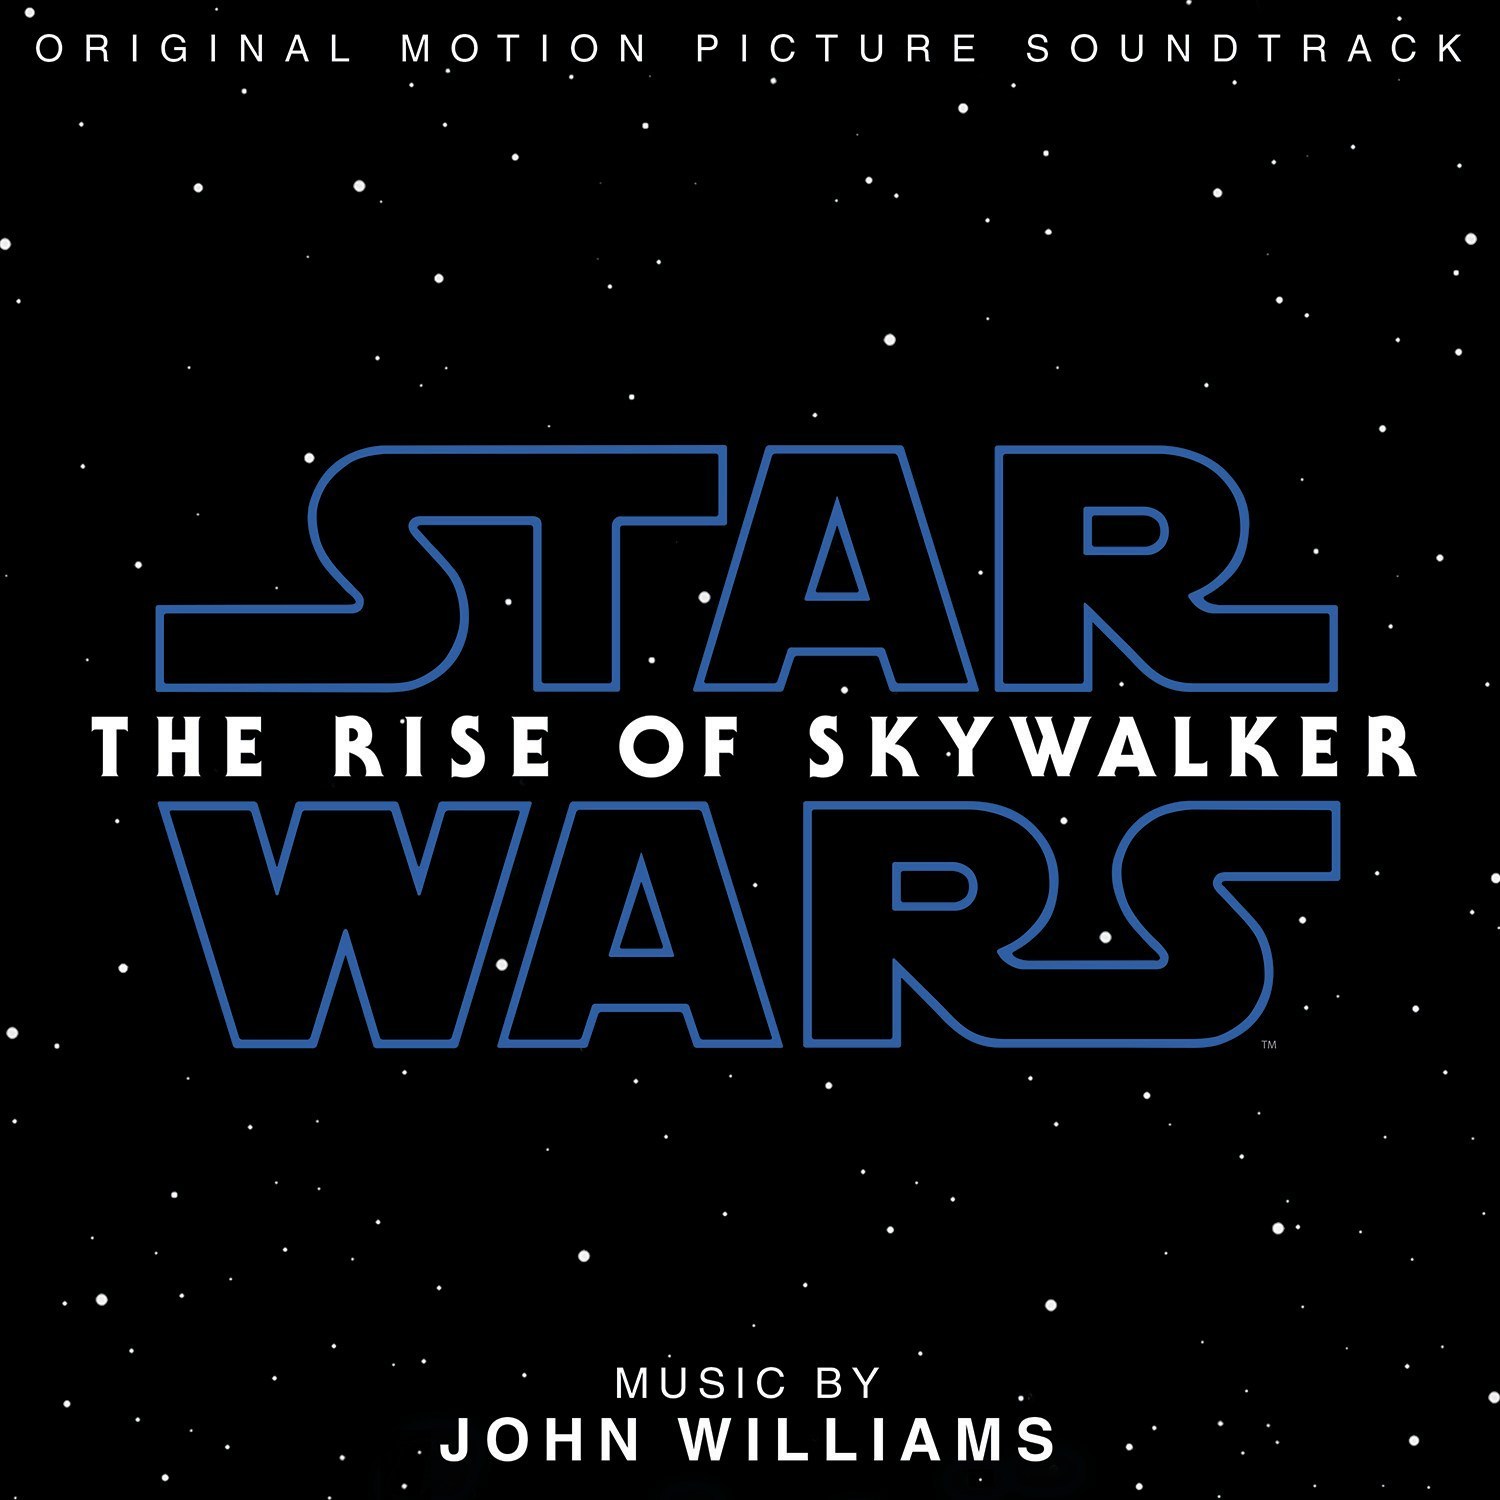 the rise of skywalker movie download free